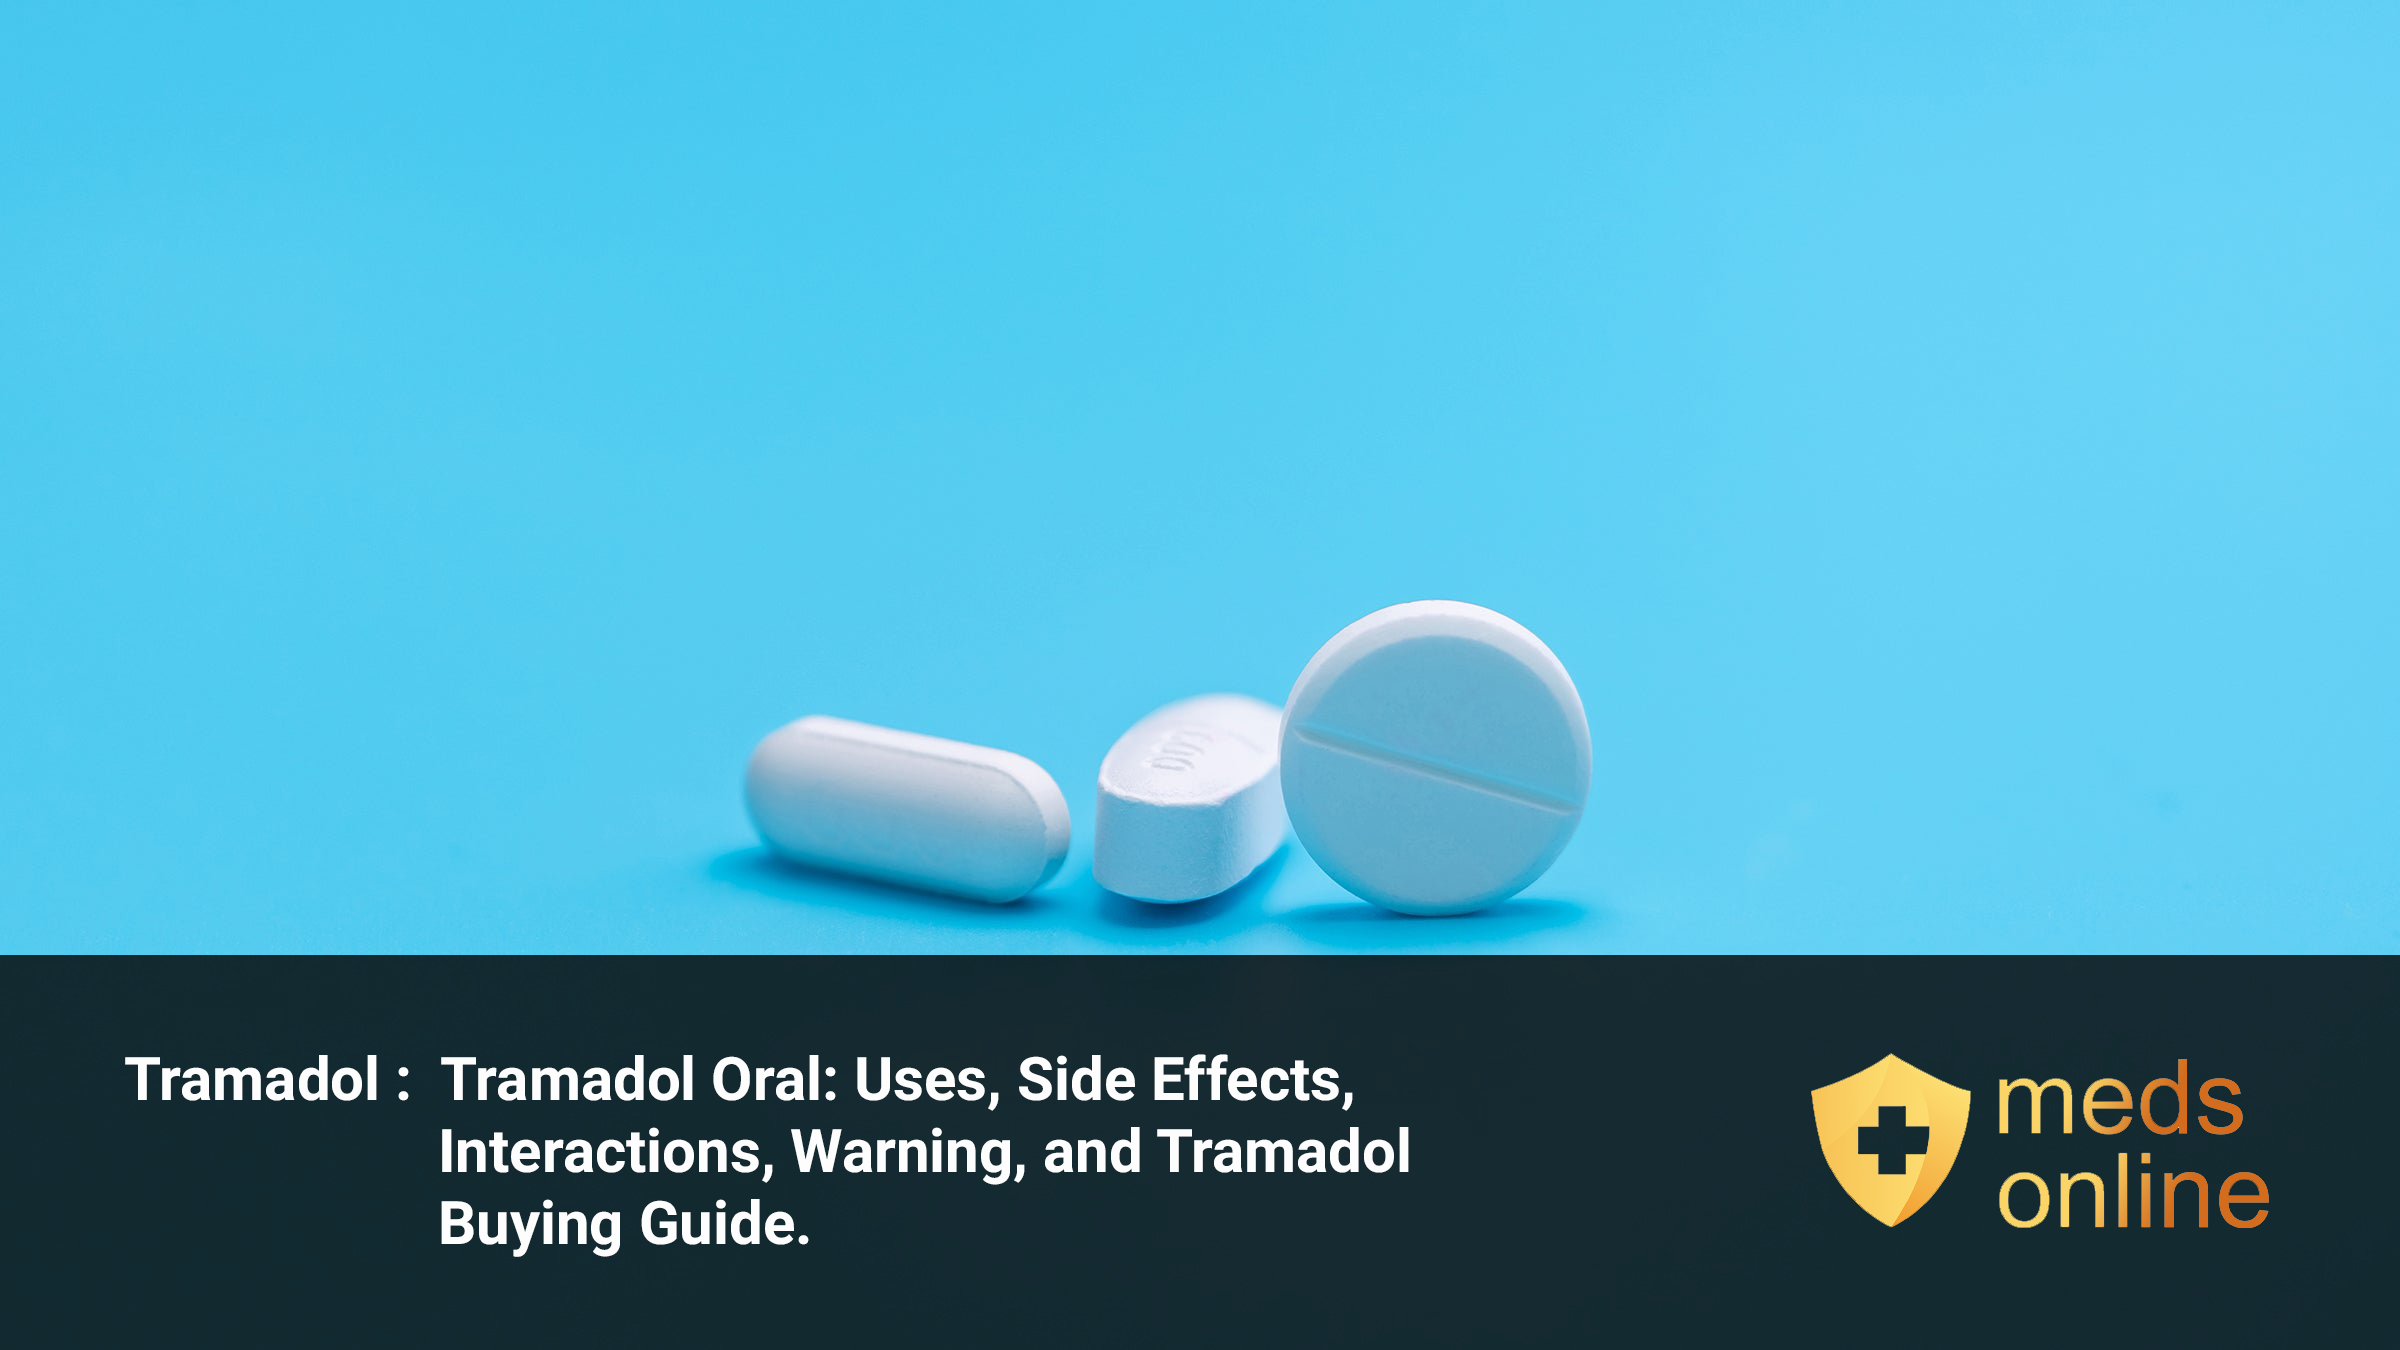 Tramadol Oral: Uses, Side Effects, Interactions, Warning, and Tramadol Buying Guide